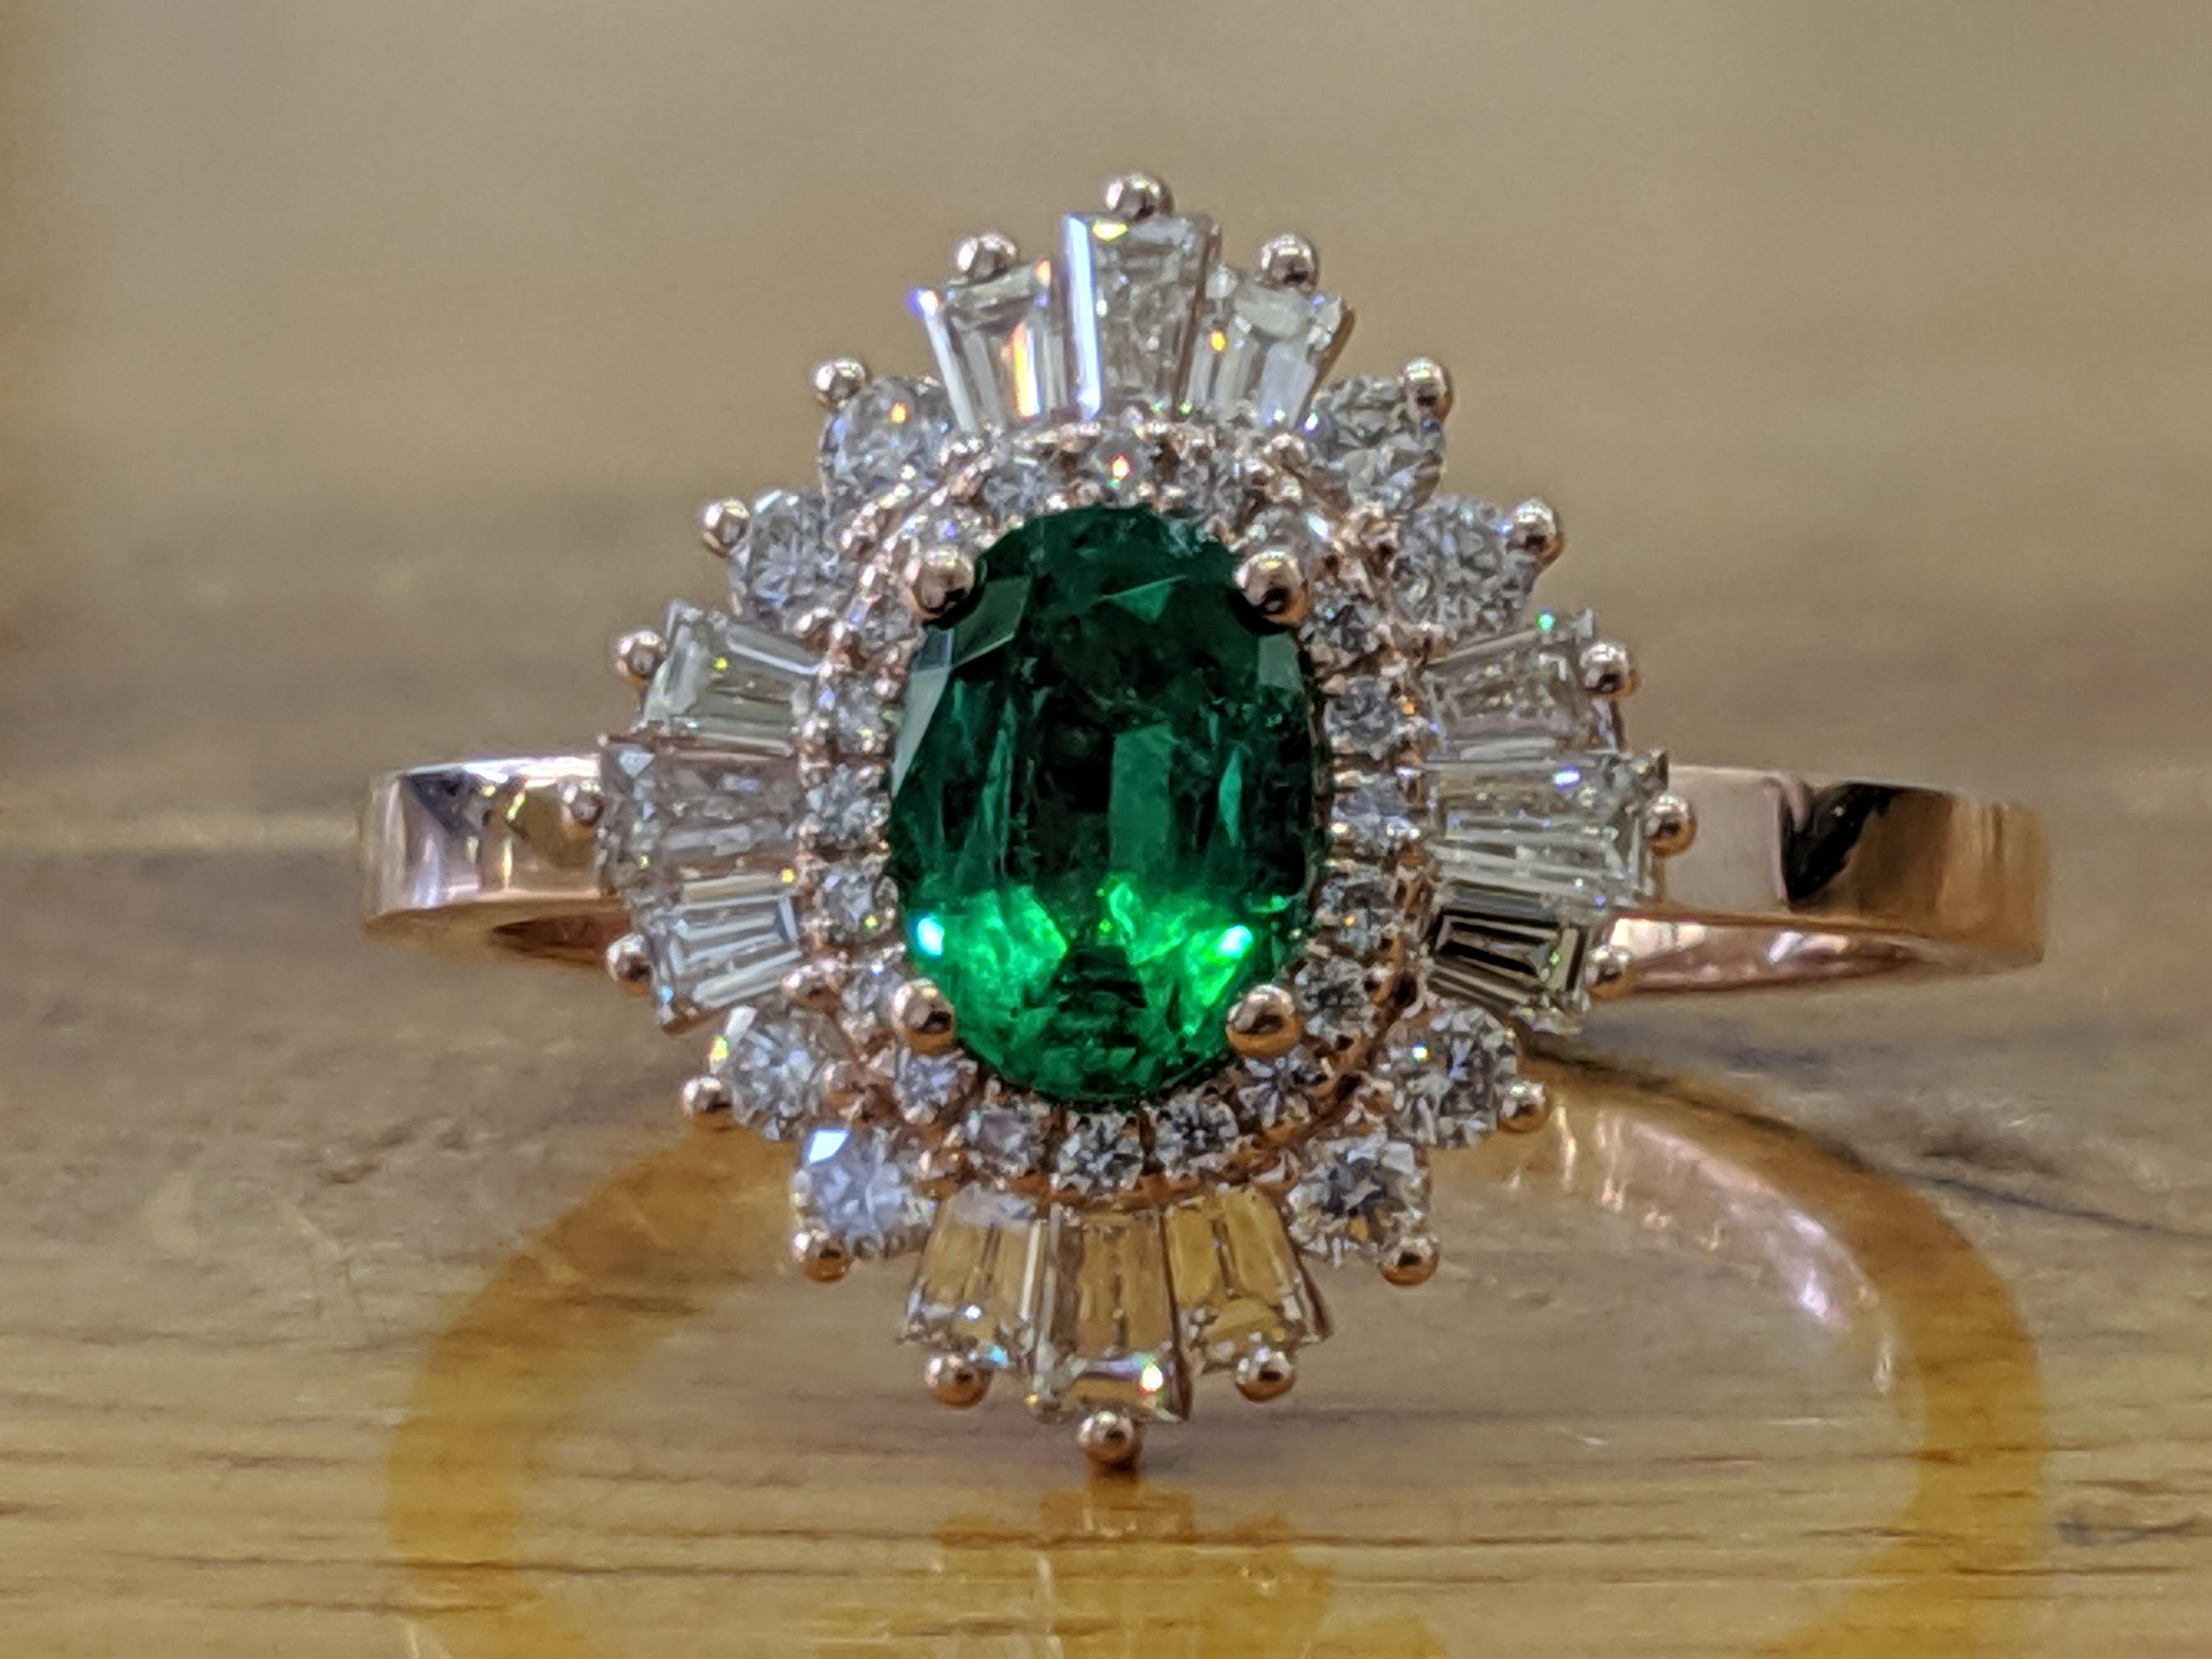 Emerald Engagement Ring, Rose Gold Diamond Engagement Ring, Vintage Emerald Halo Ring, Gatsby Emerald Ring, Natural Green Oval Emerald Ring
 
 Main Stone Name: Oval Cut Emerald
 Main Stone Weight: 3/4ct.
 Main Stone Clarity: Eye Clean
 Main Stone